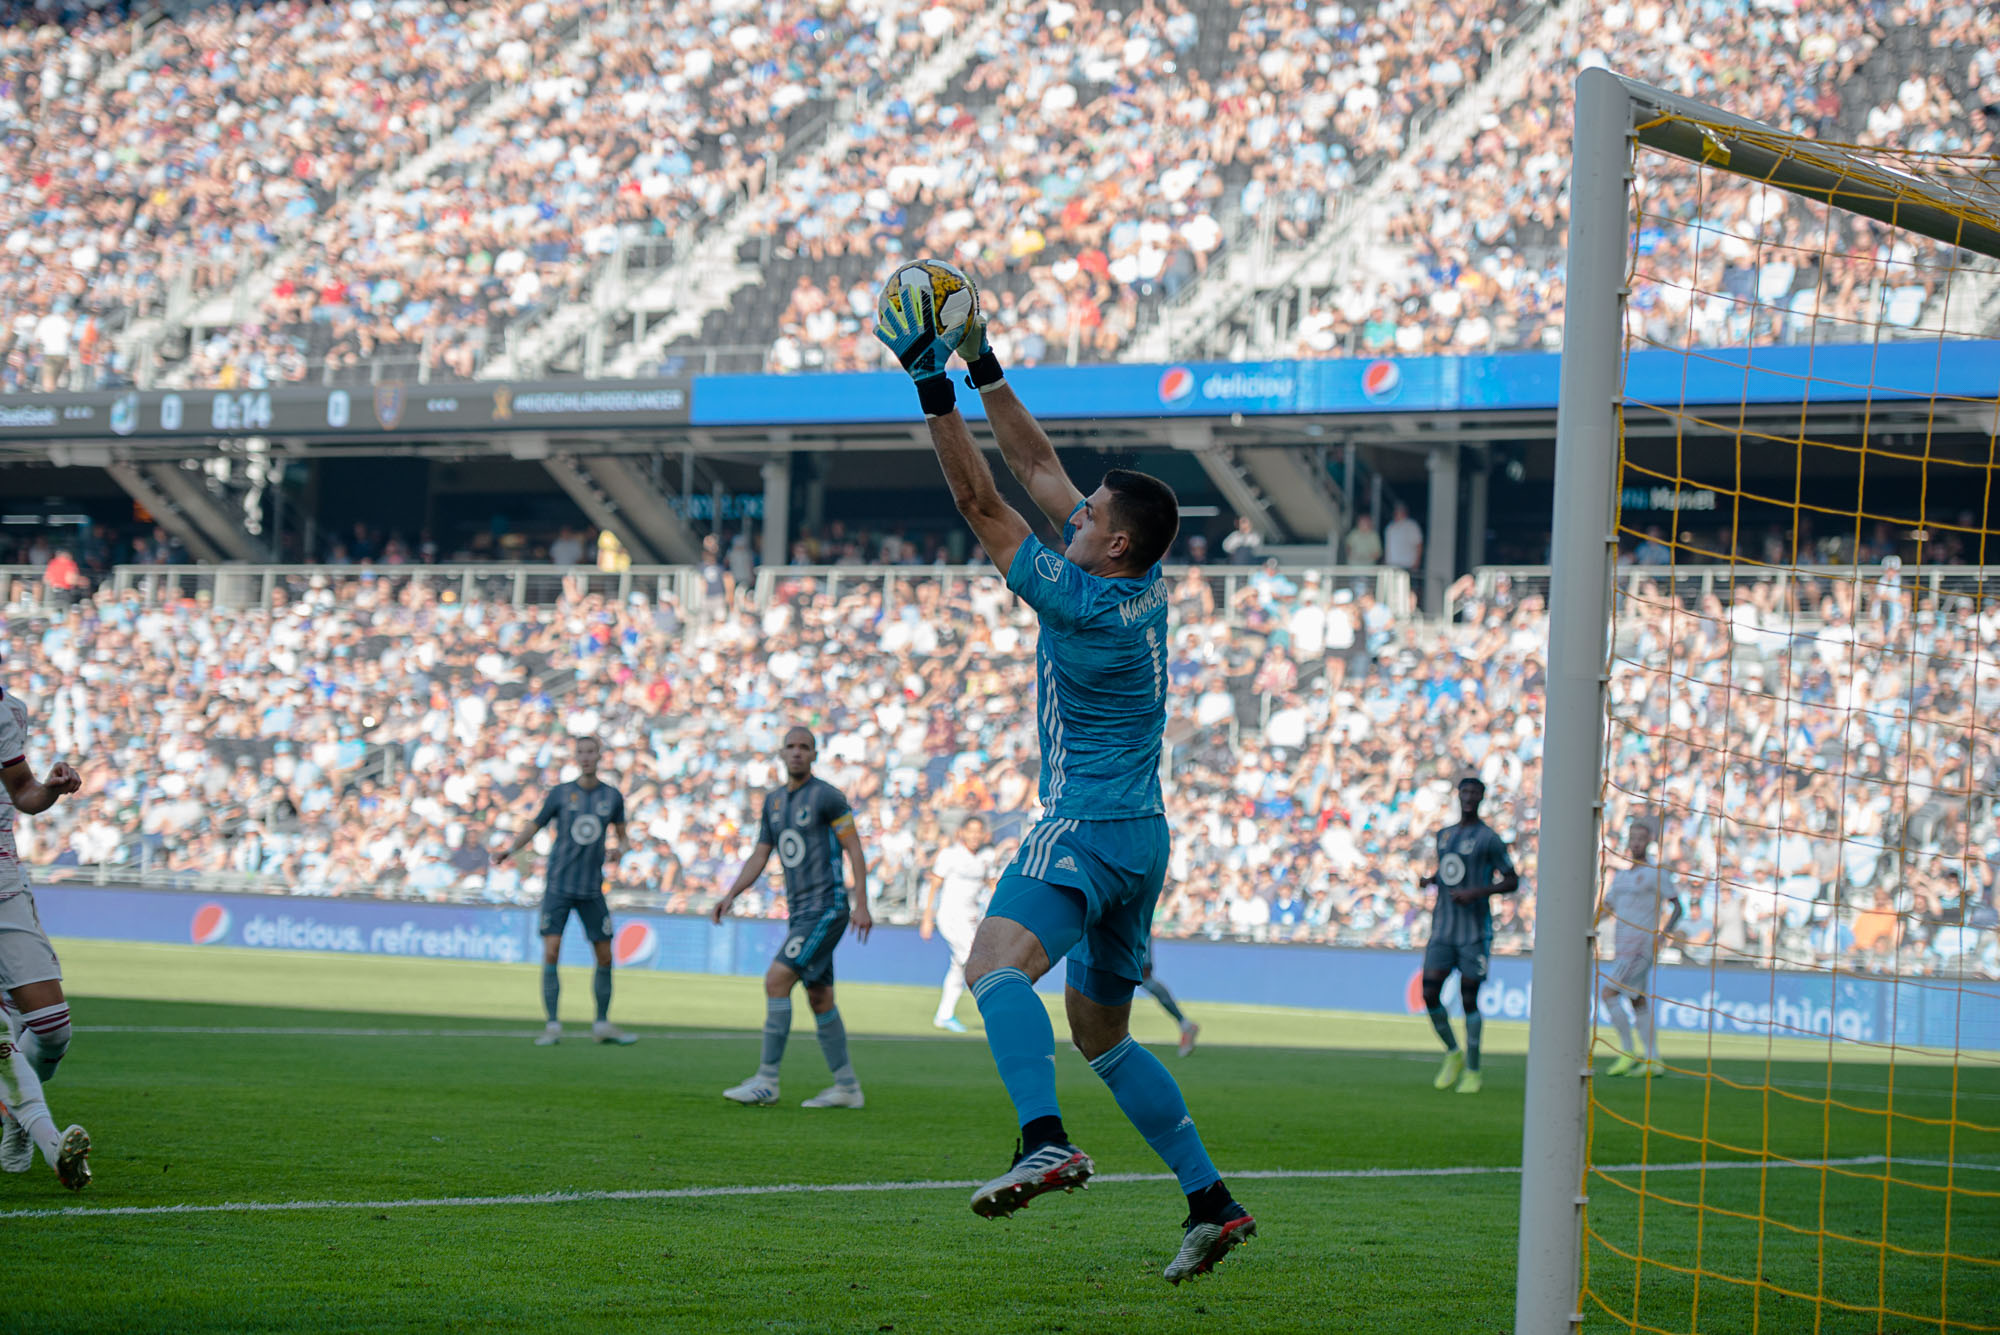 September 15, 2019 - Saint Paul, Minnesota, United States - Vito Mannone makes a save during an MLS match between Minnesota United and Real Salt Lake at Allianz Field